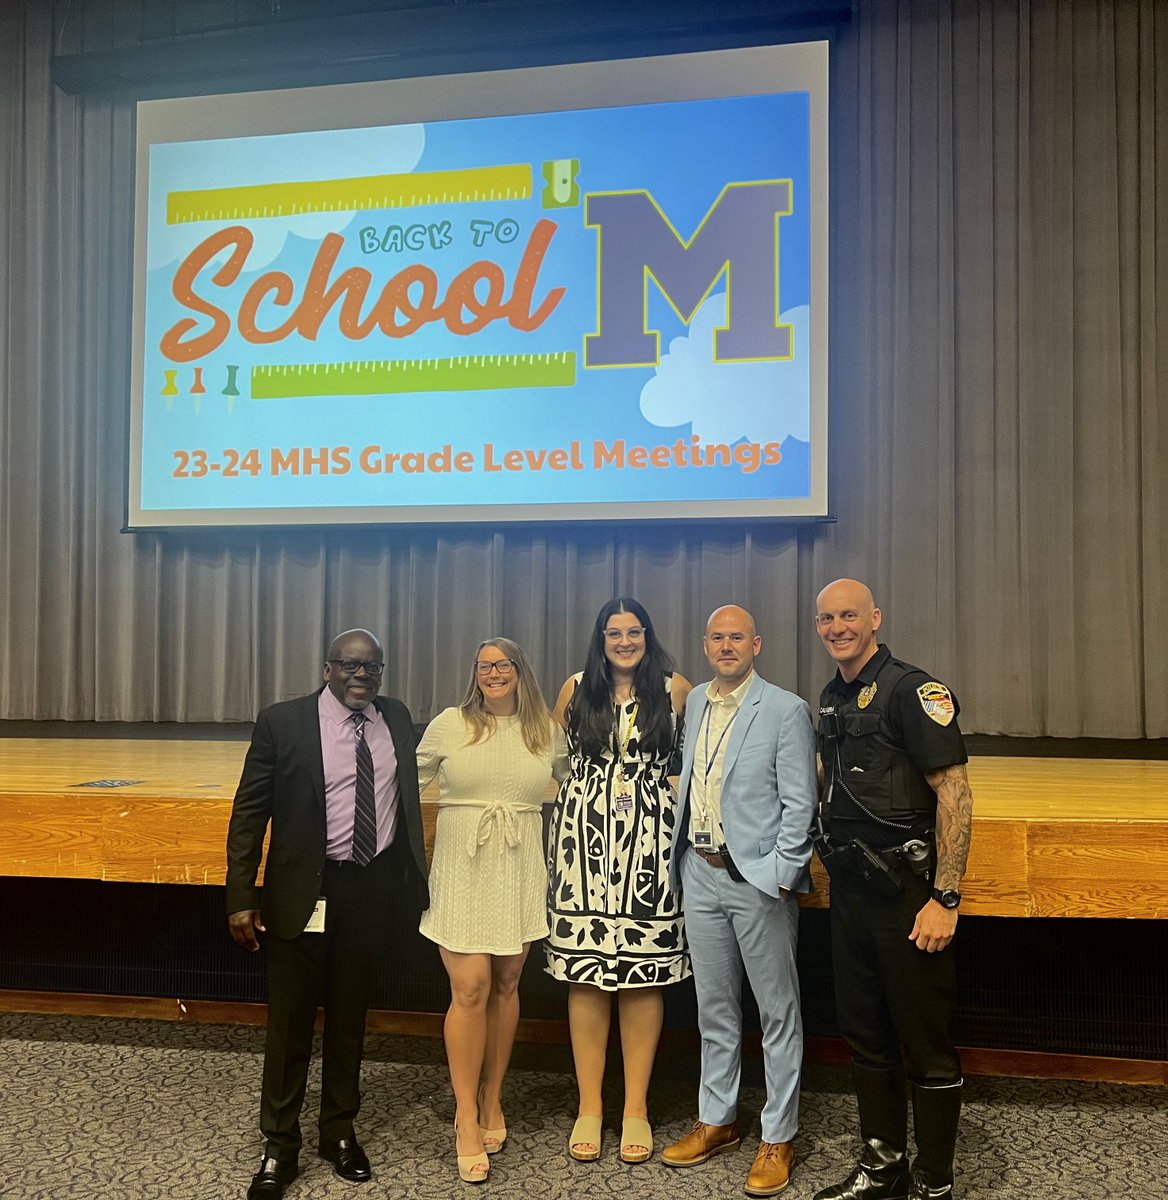 Welcome back, MHS! Mr. Skeete, Mrs. Heydt, Ms. Ciccarelli, Mr. Kopetsky, and Officer Calabria are glad you're here! We are meeting with each grade level today to go over expectations and ways to have a fantastic year! 💙💛 @muhlsd